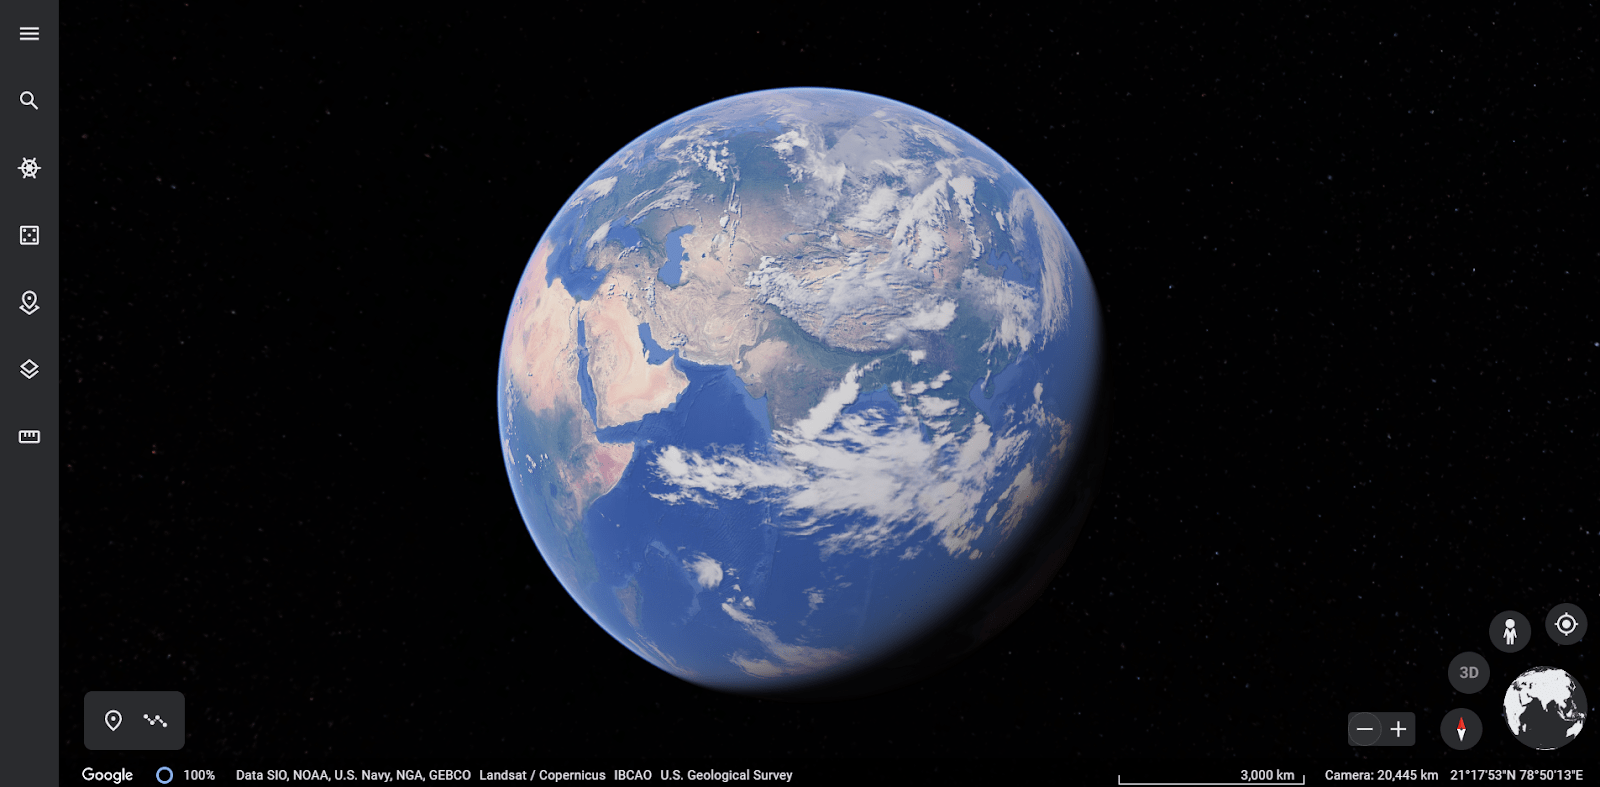 google earth download for pc